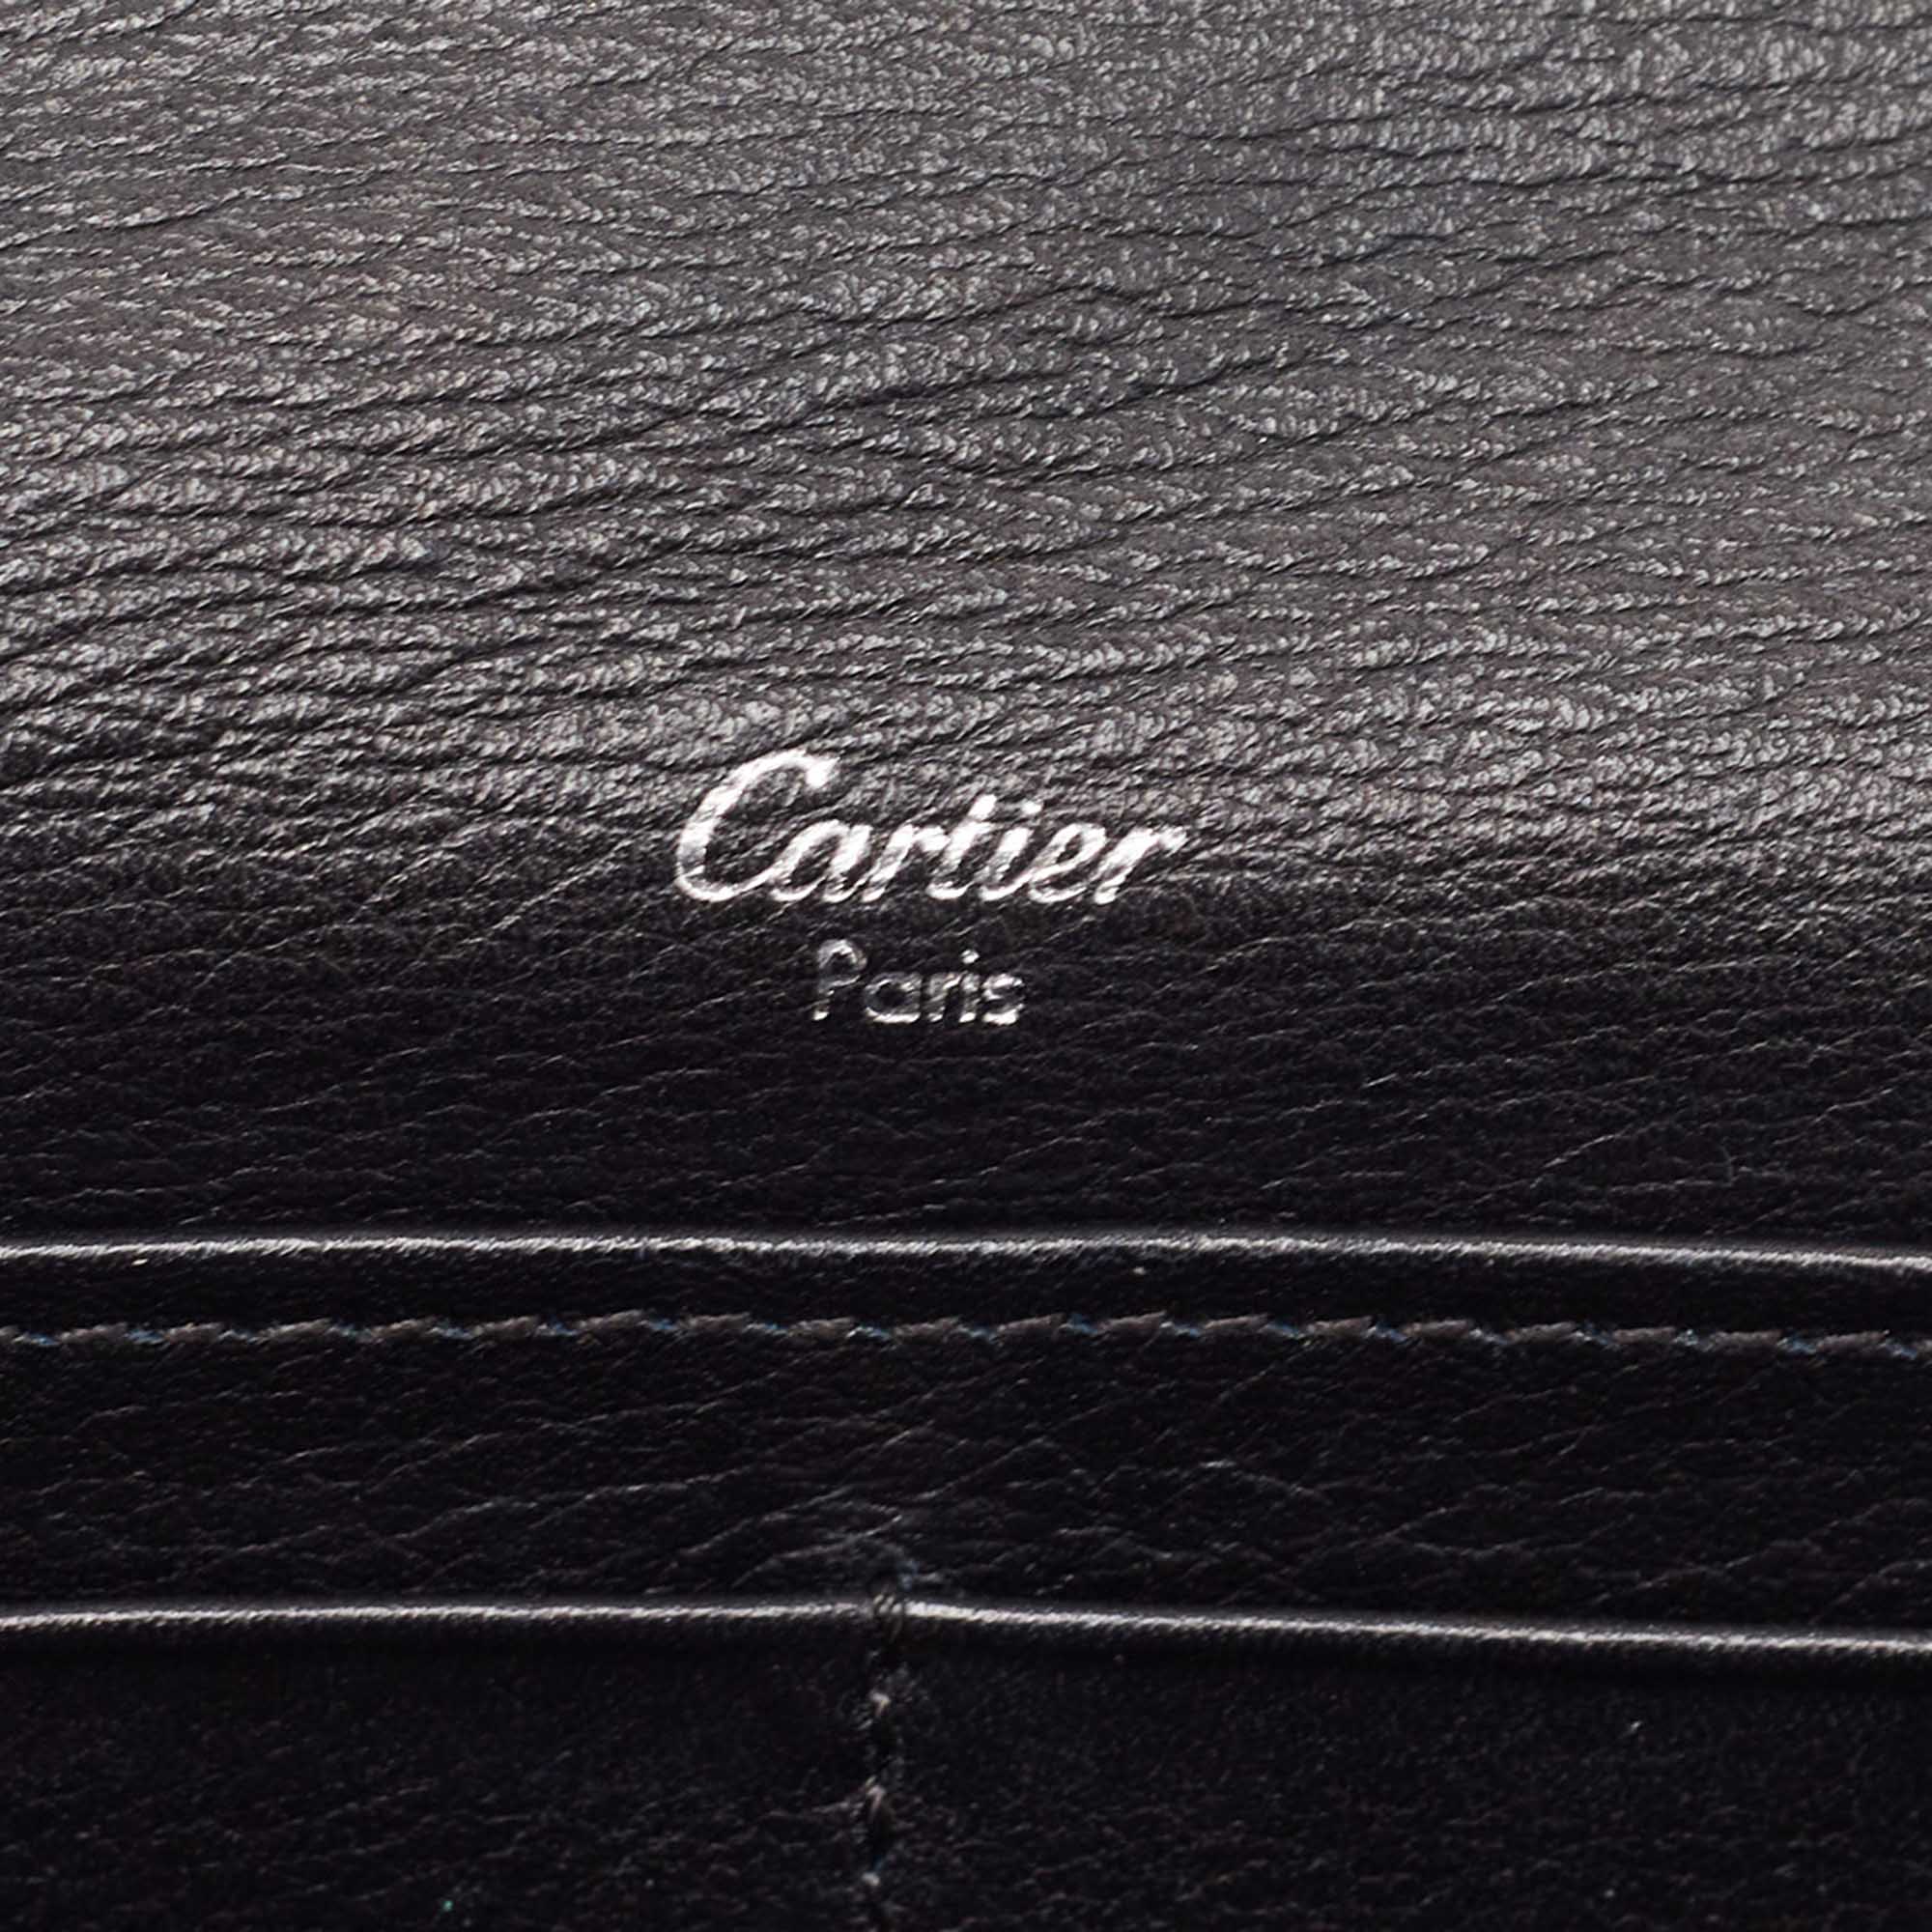 Cartier Black Patent Leather Happy Birthday Continental Wallet